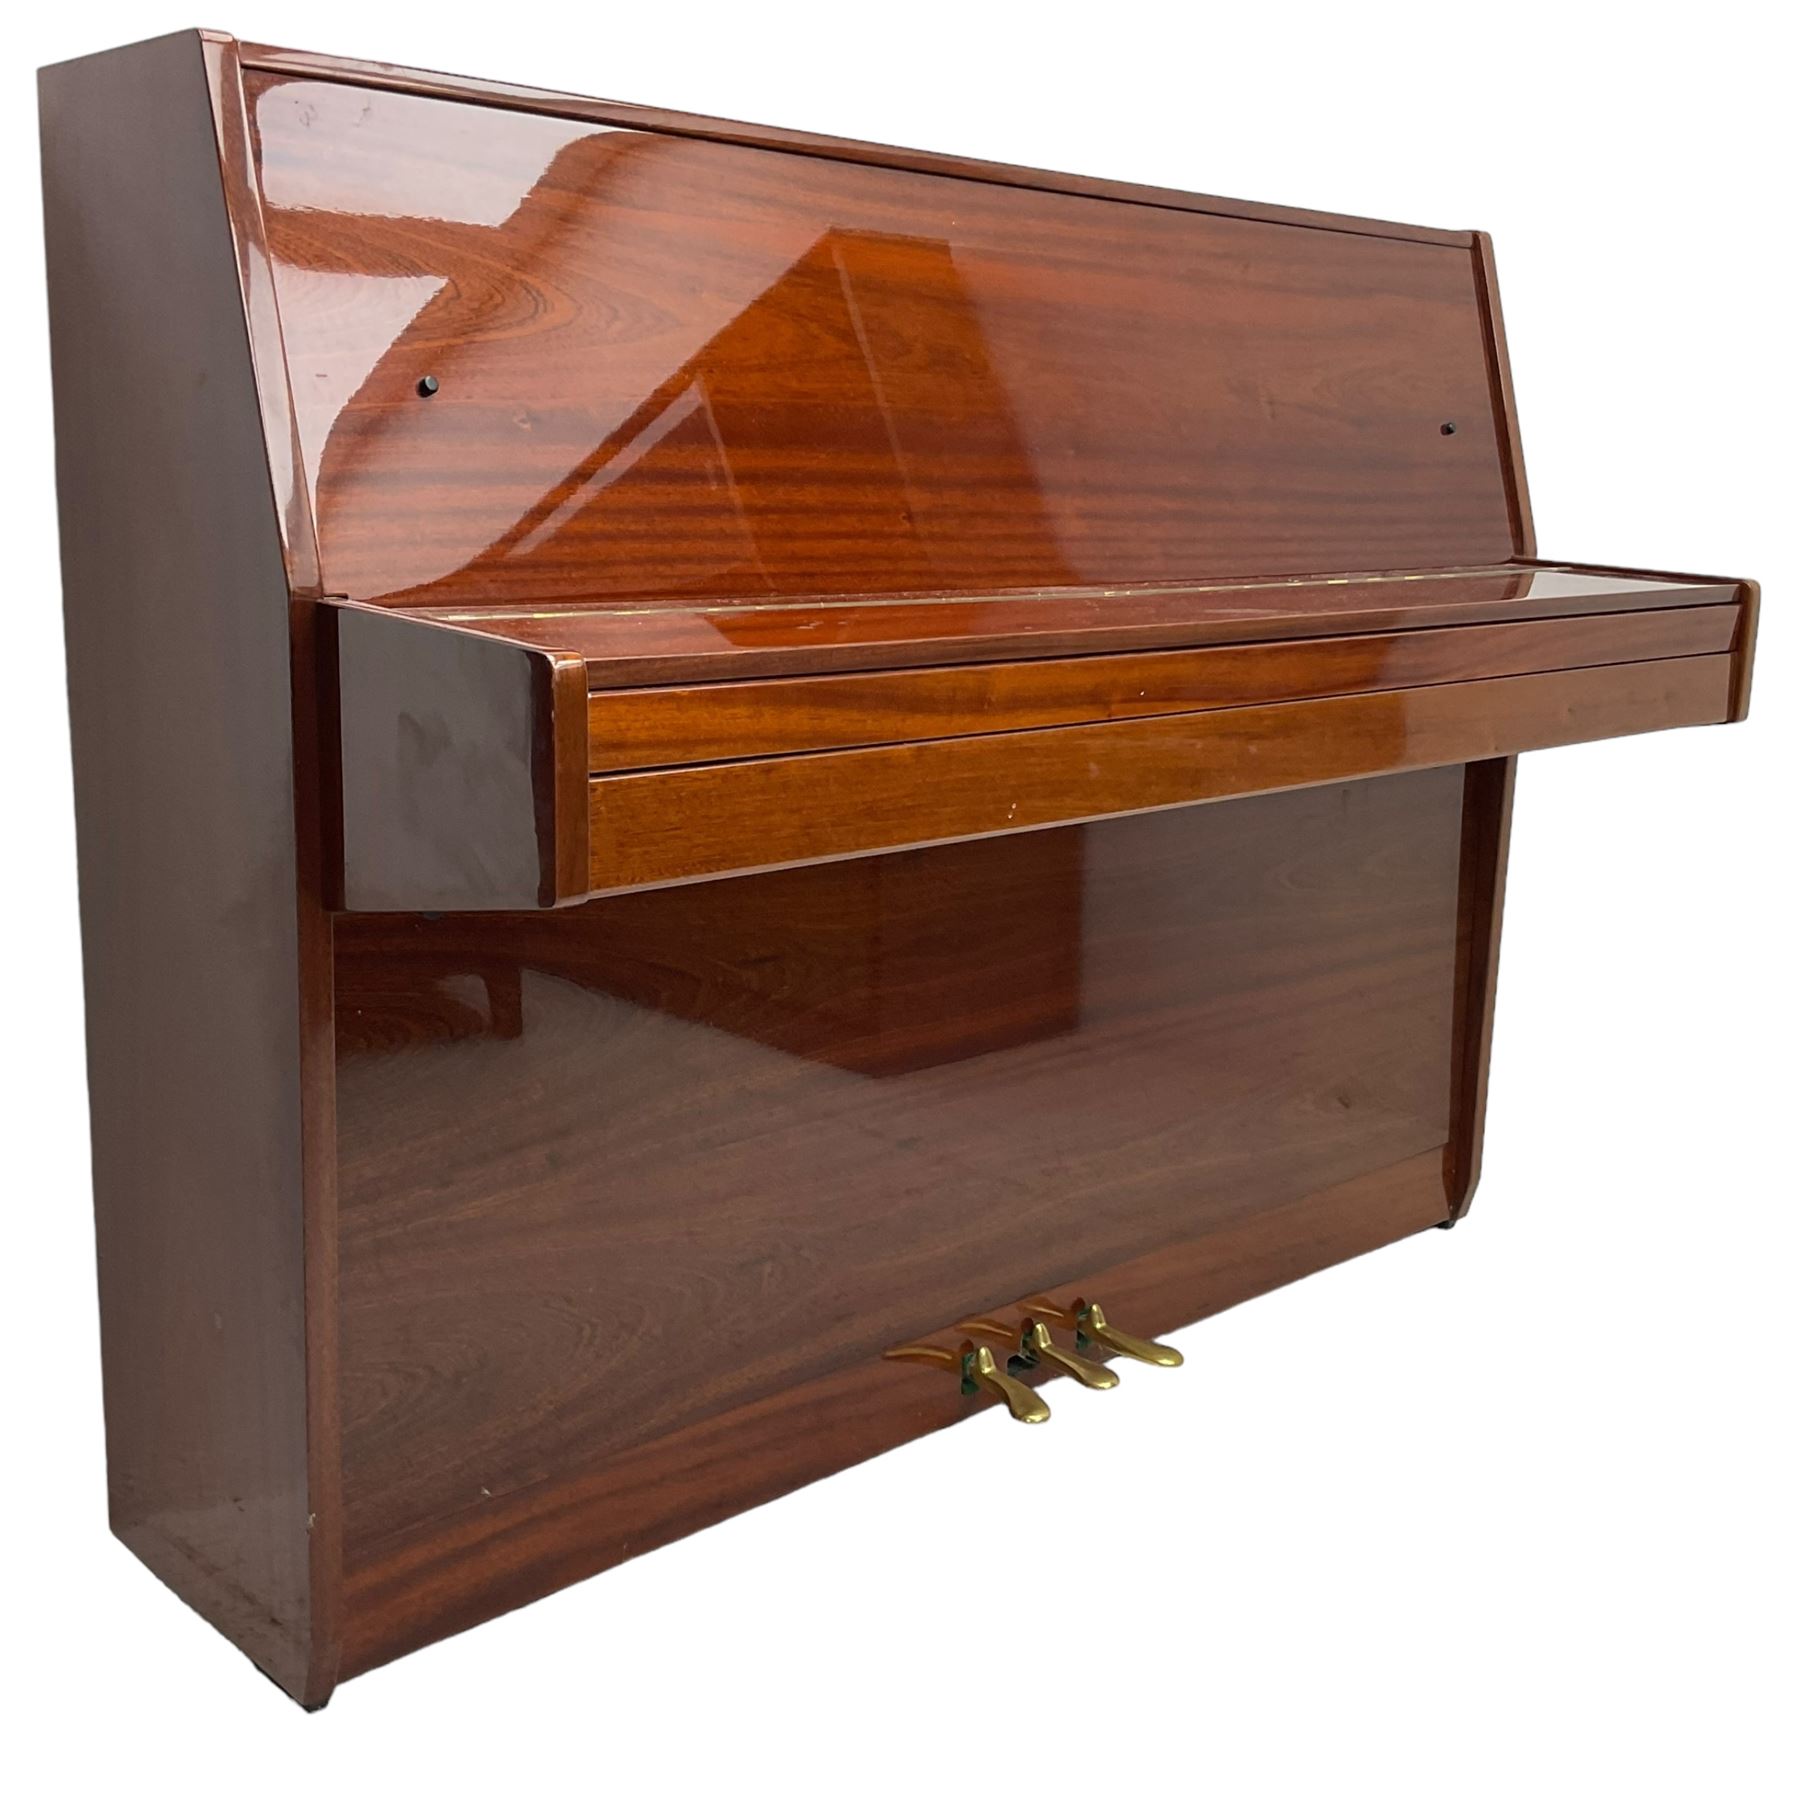 Steinmayer upright series 108 piano in sapele mahogany case